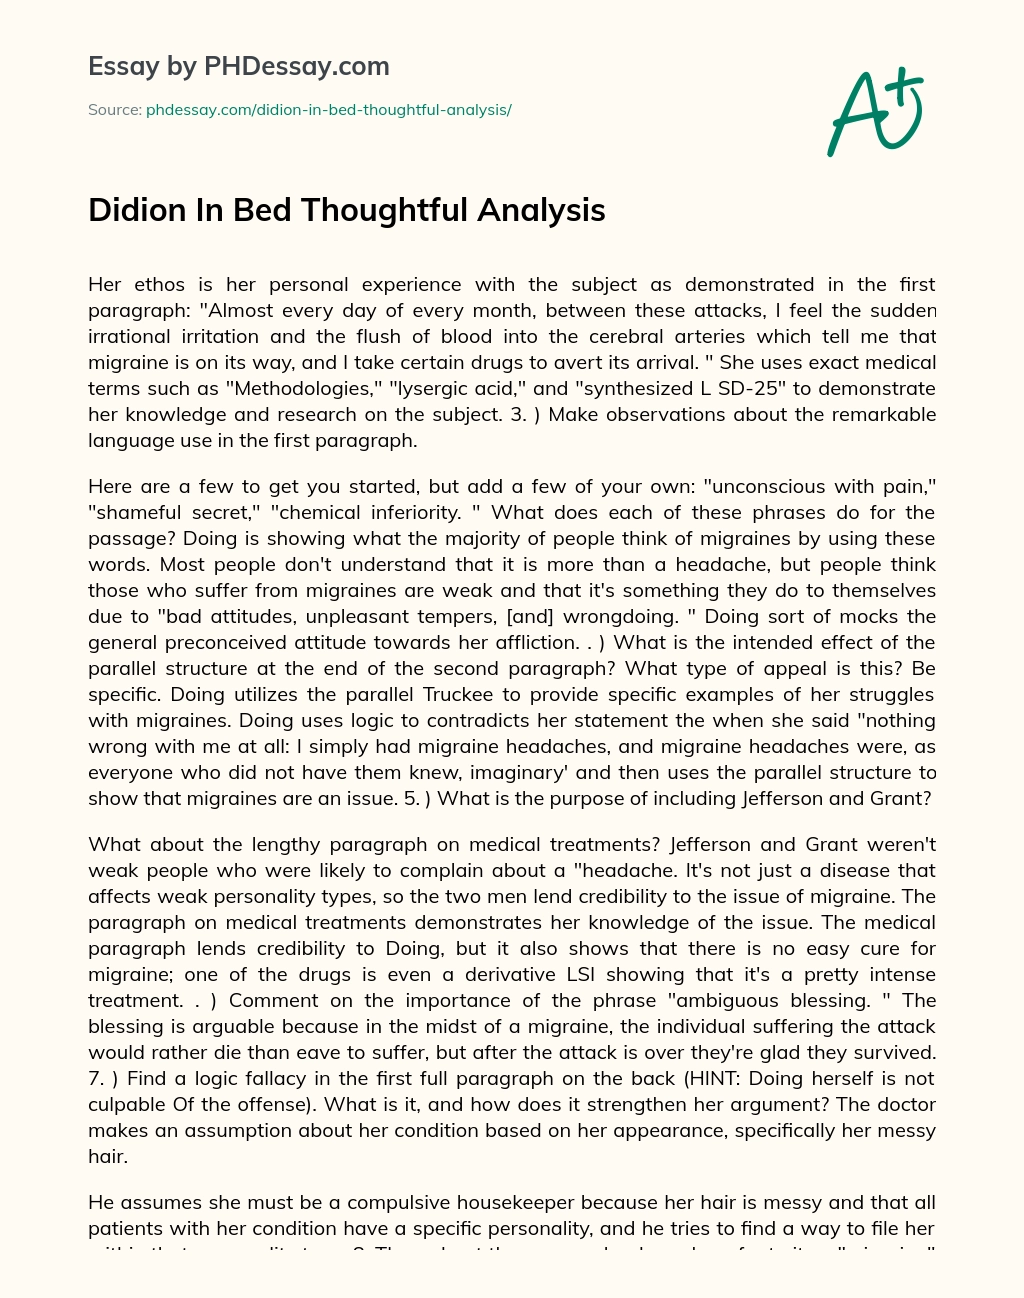 Didion In Bed Thoughtful Analysis essay